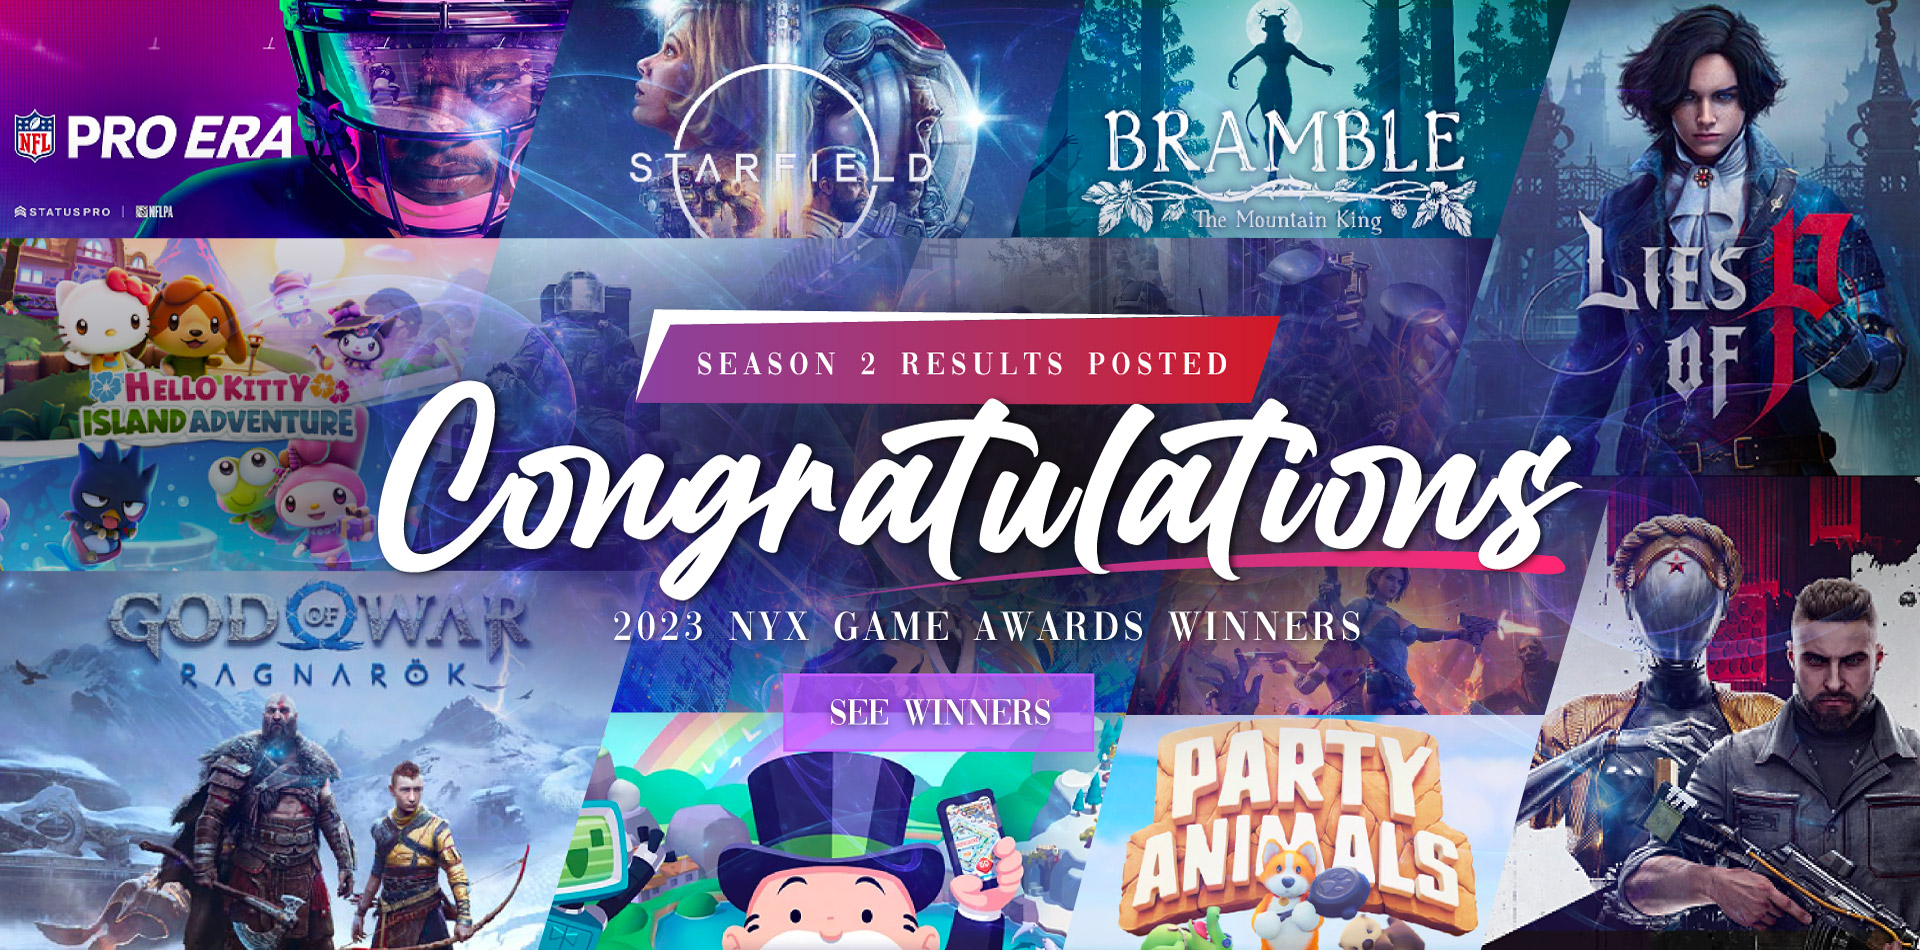 2023 NYX Game Awards Full Results Announced!